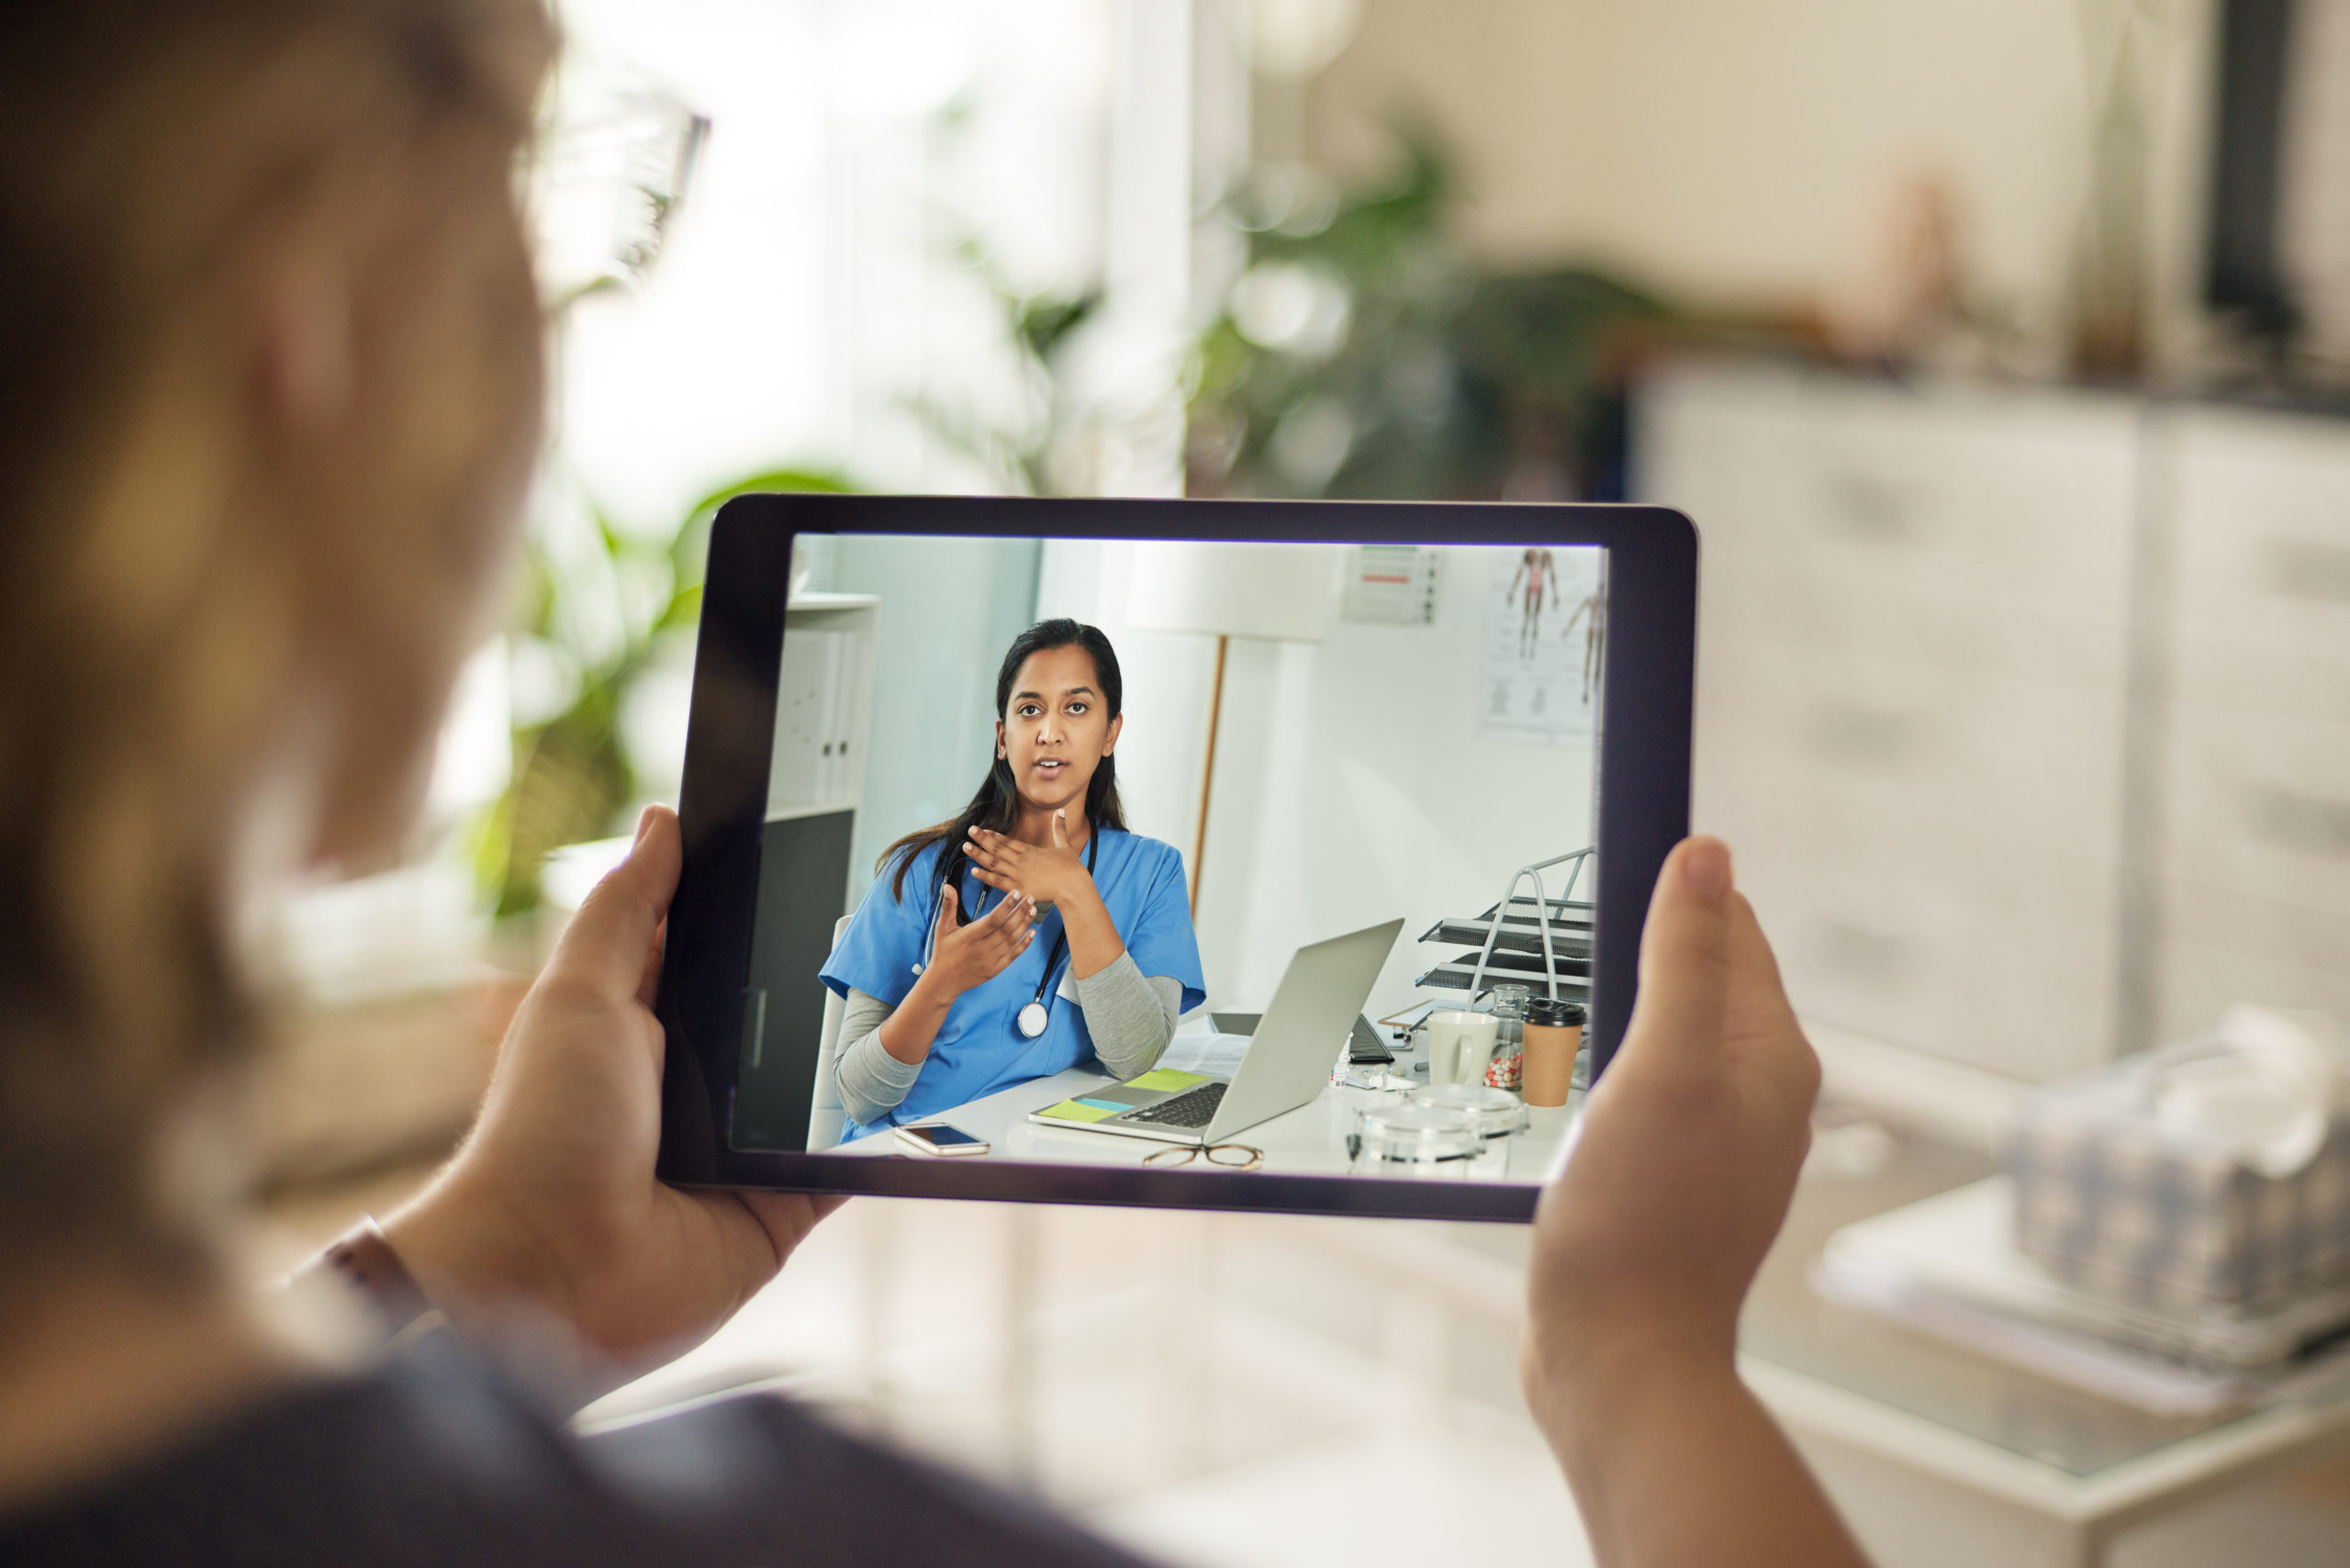 Telehealth startups are revolutionizing health care while meeting patient needs